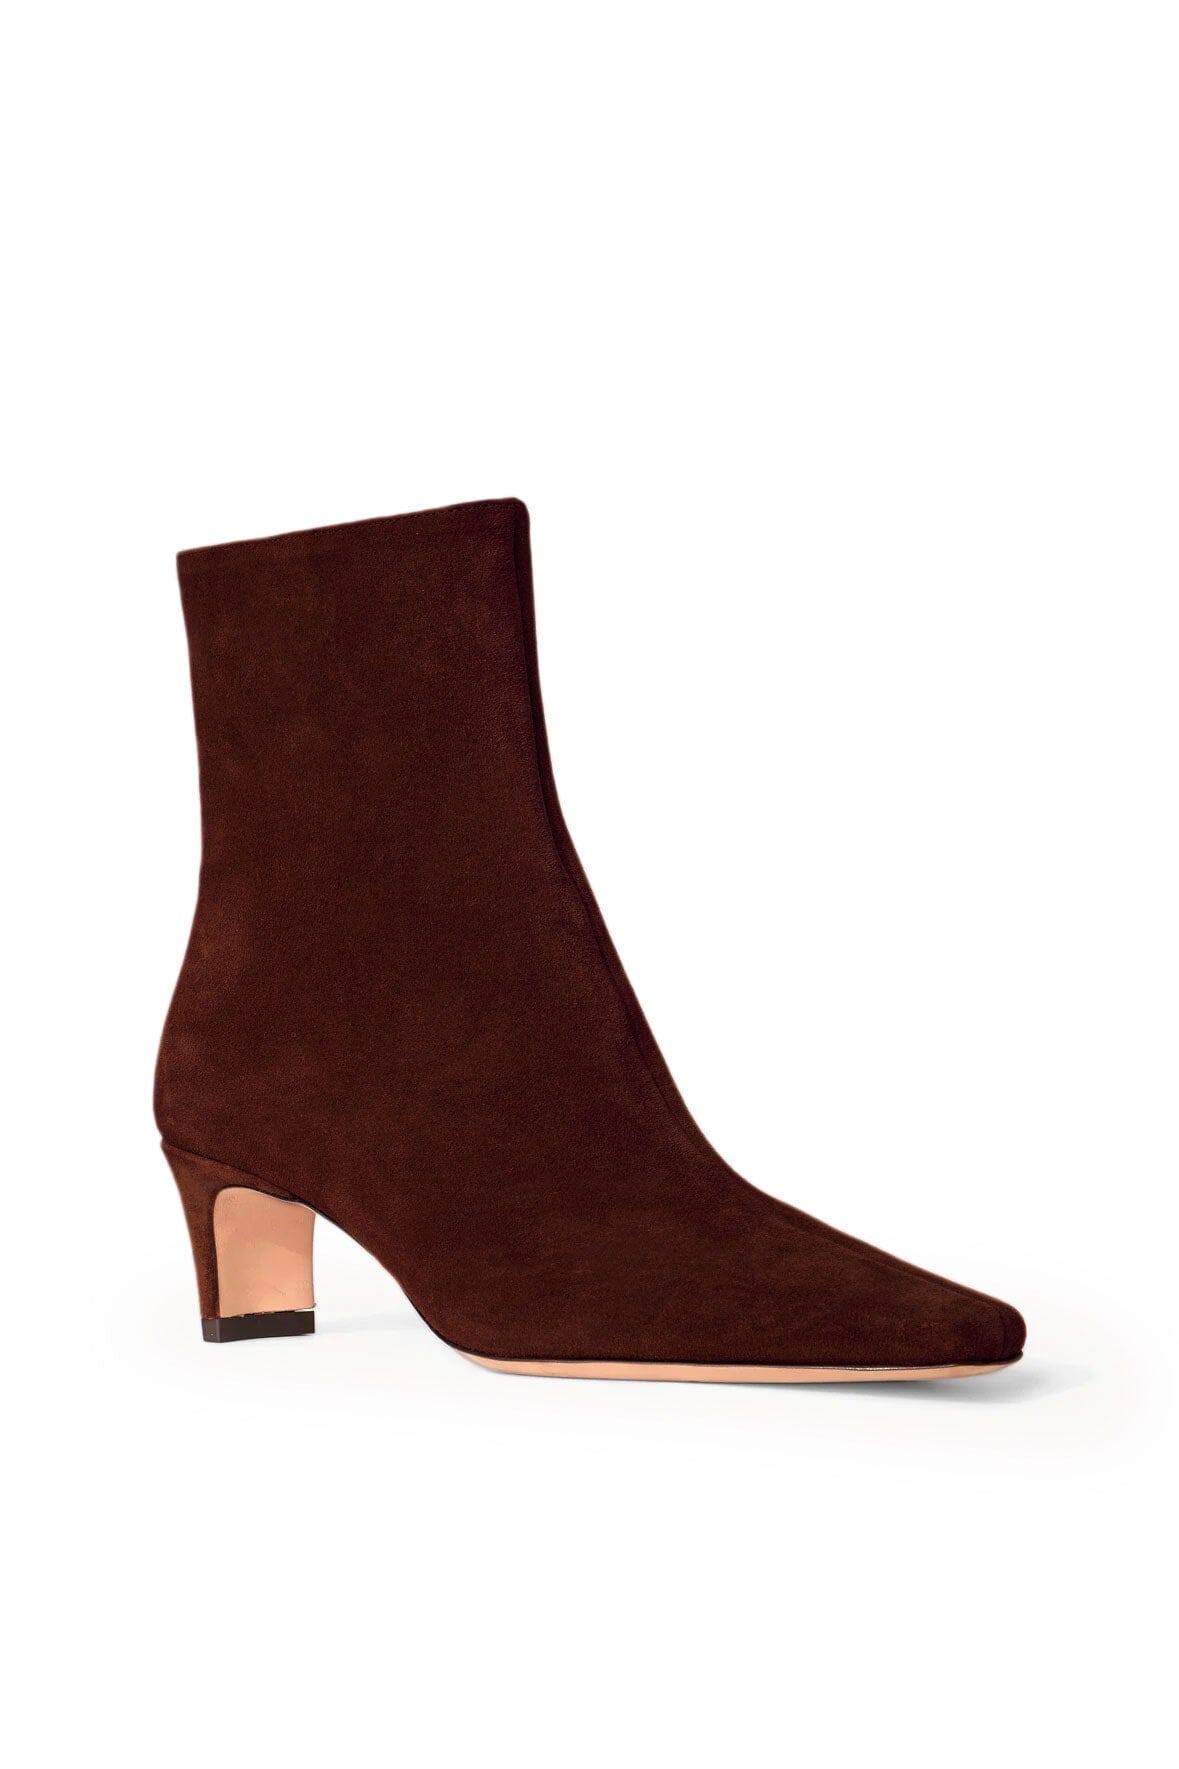 STAUD WALLY ANKLE BOOT MAHOGANY SUEDE